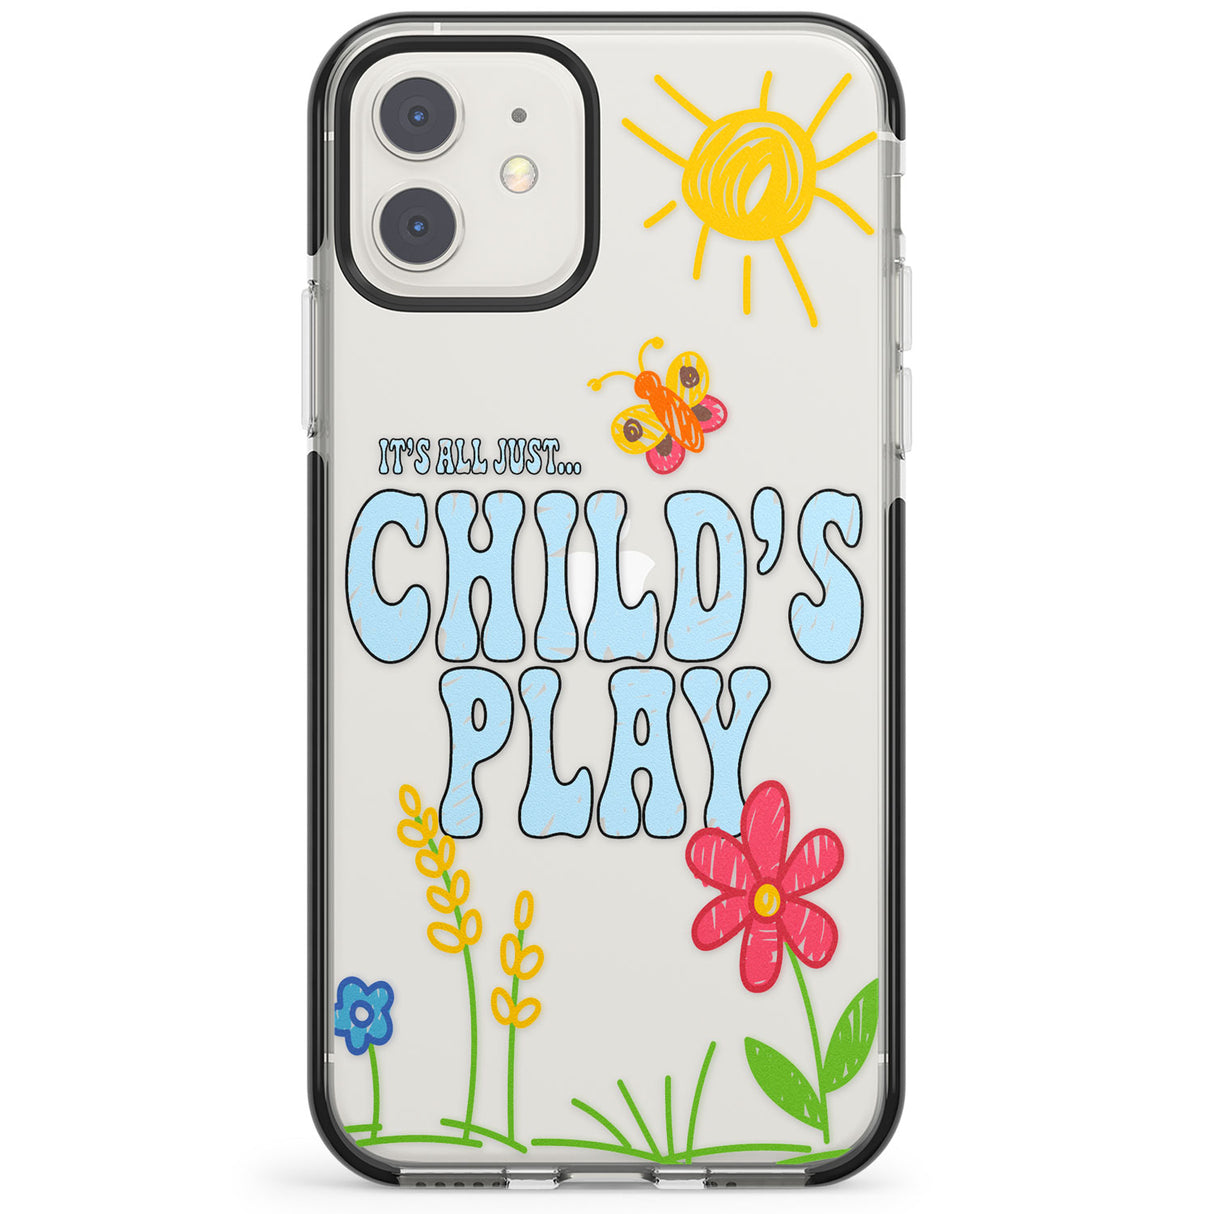 Child's Play Impact Phone Case for iPhone 11, iphone 12